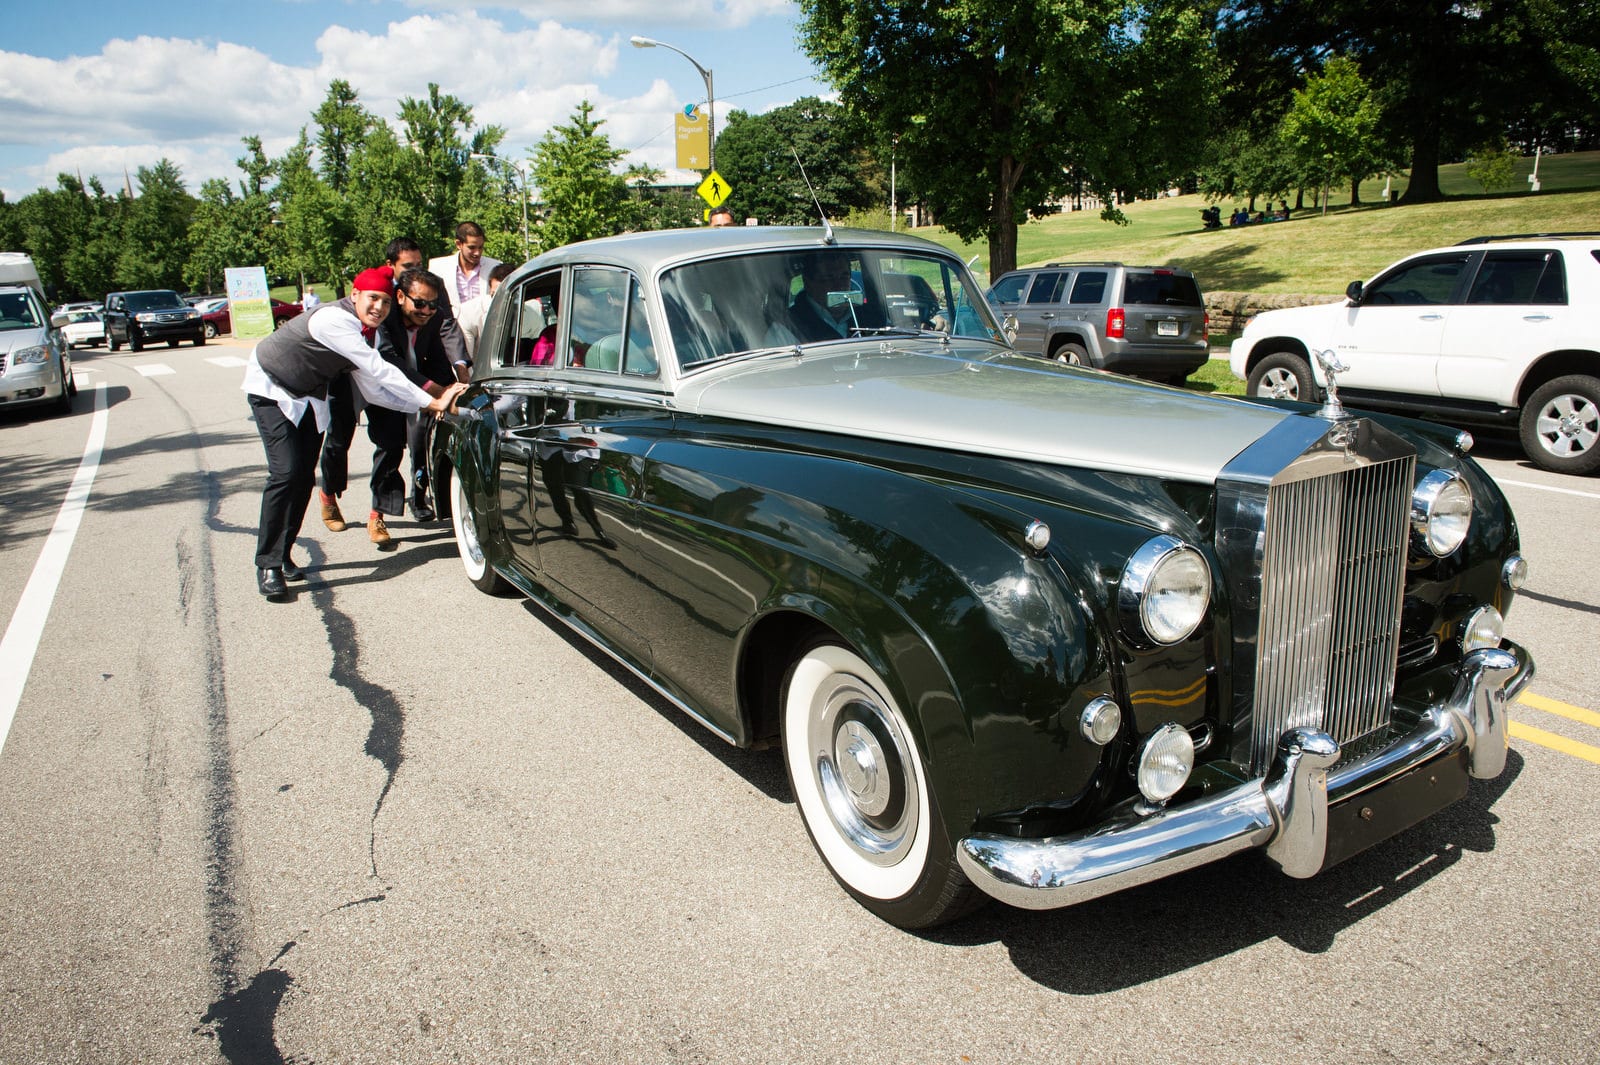 A group of men push a vintage Rolls Royce limousine at the end of a Renaissance Phipps South Asian Wedding.